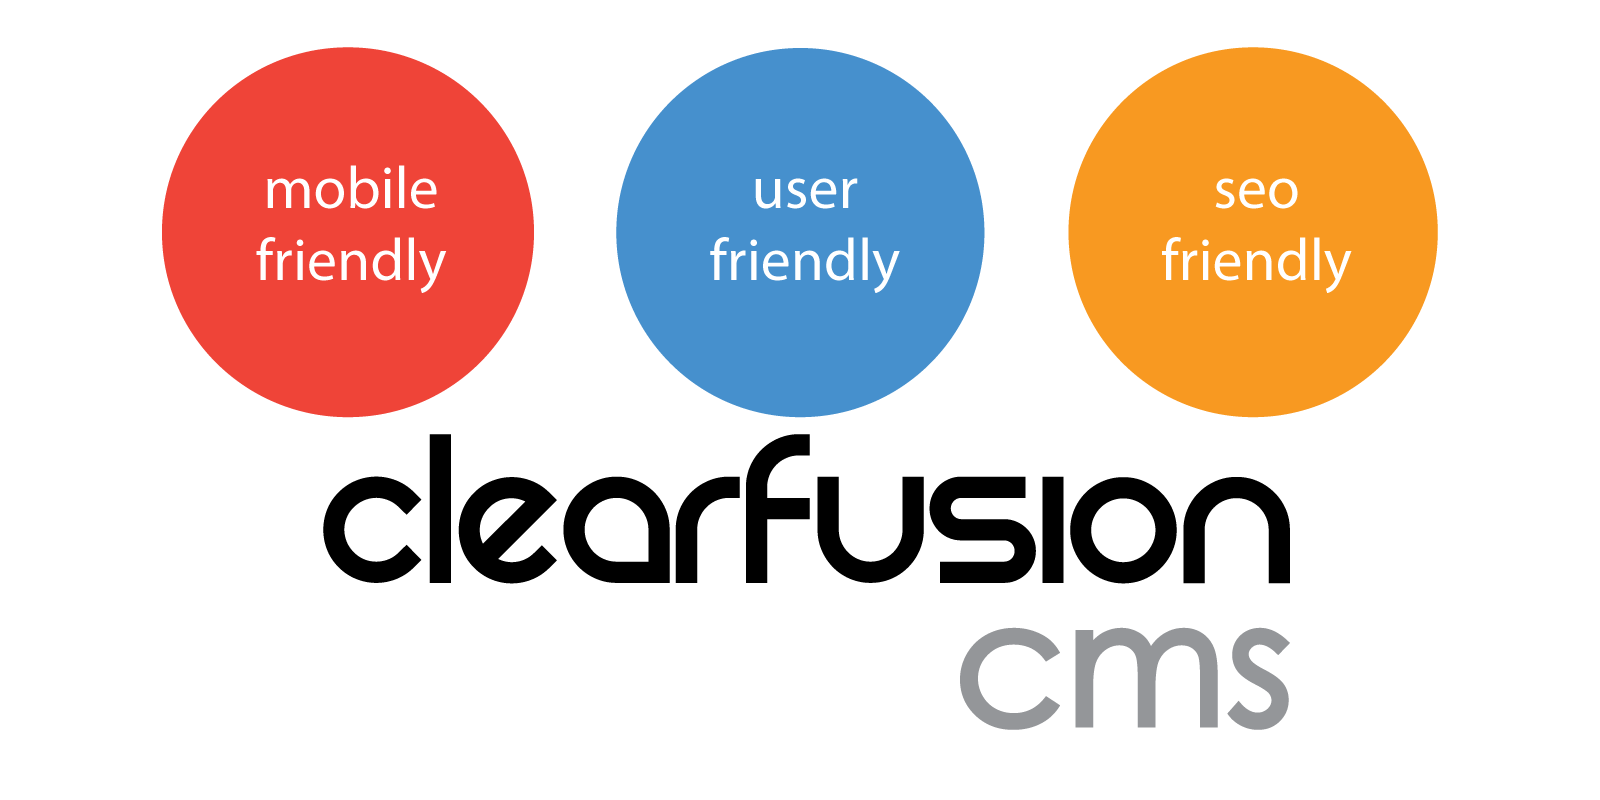 (c) Clearfusioncms.com